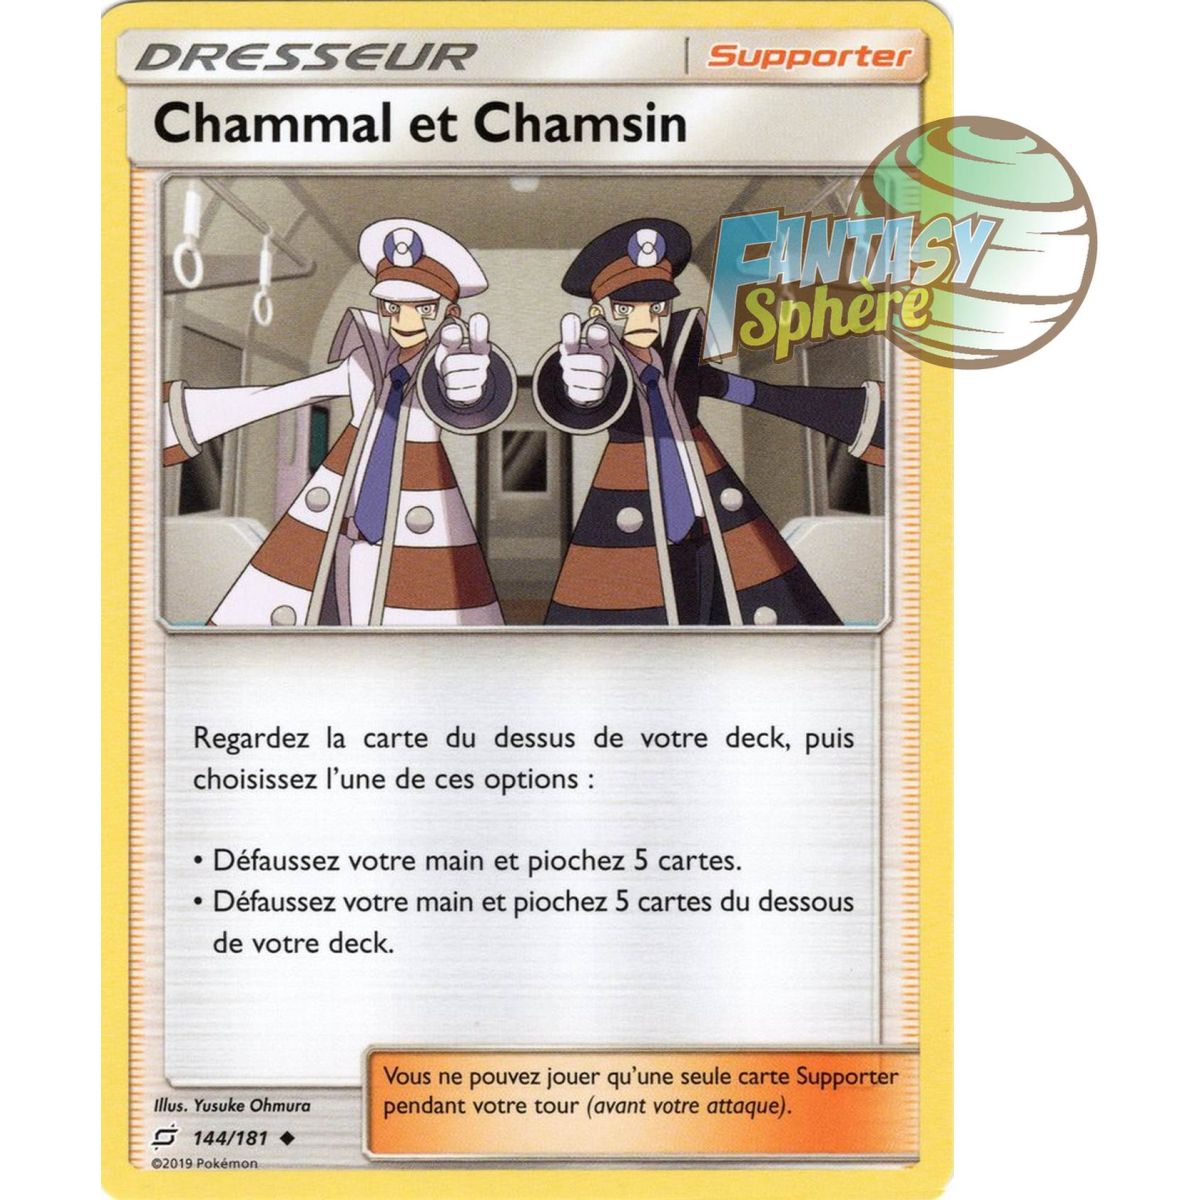 Chammal and Chamsin - Uncommon 144/181 - Sun and Moon 9 Shock Duo